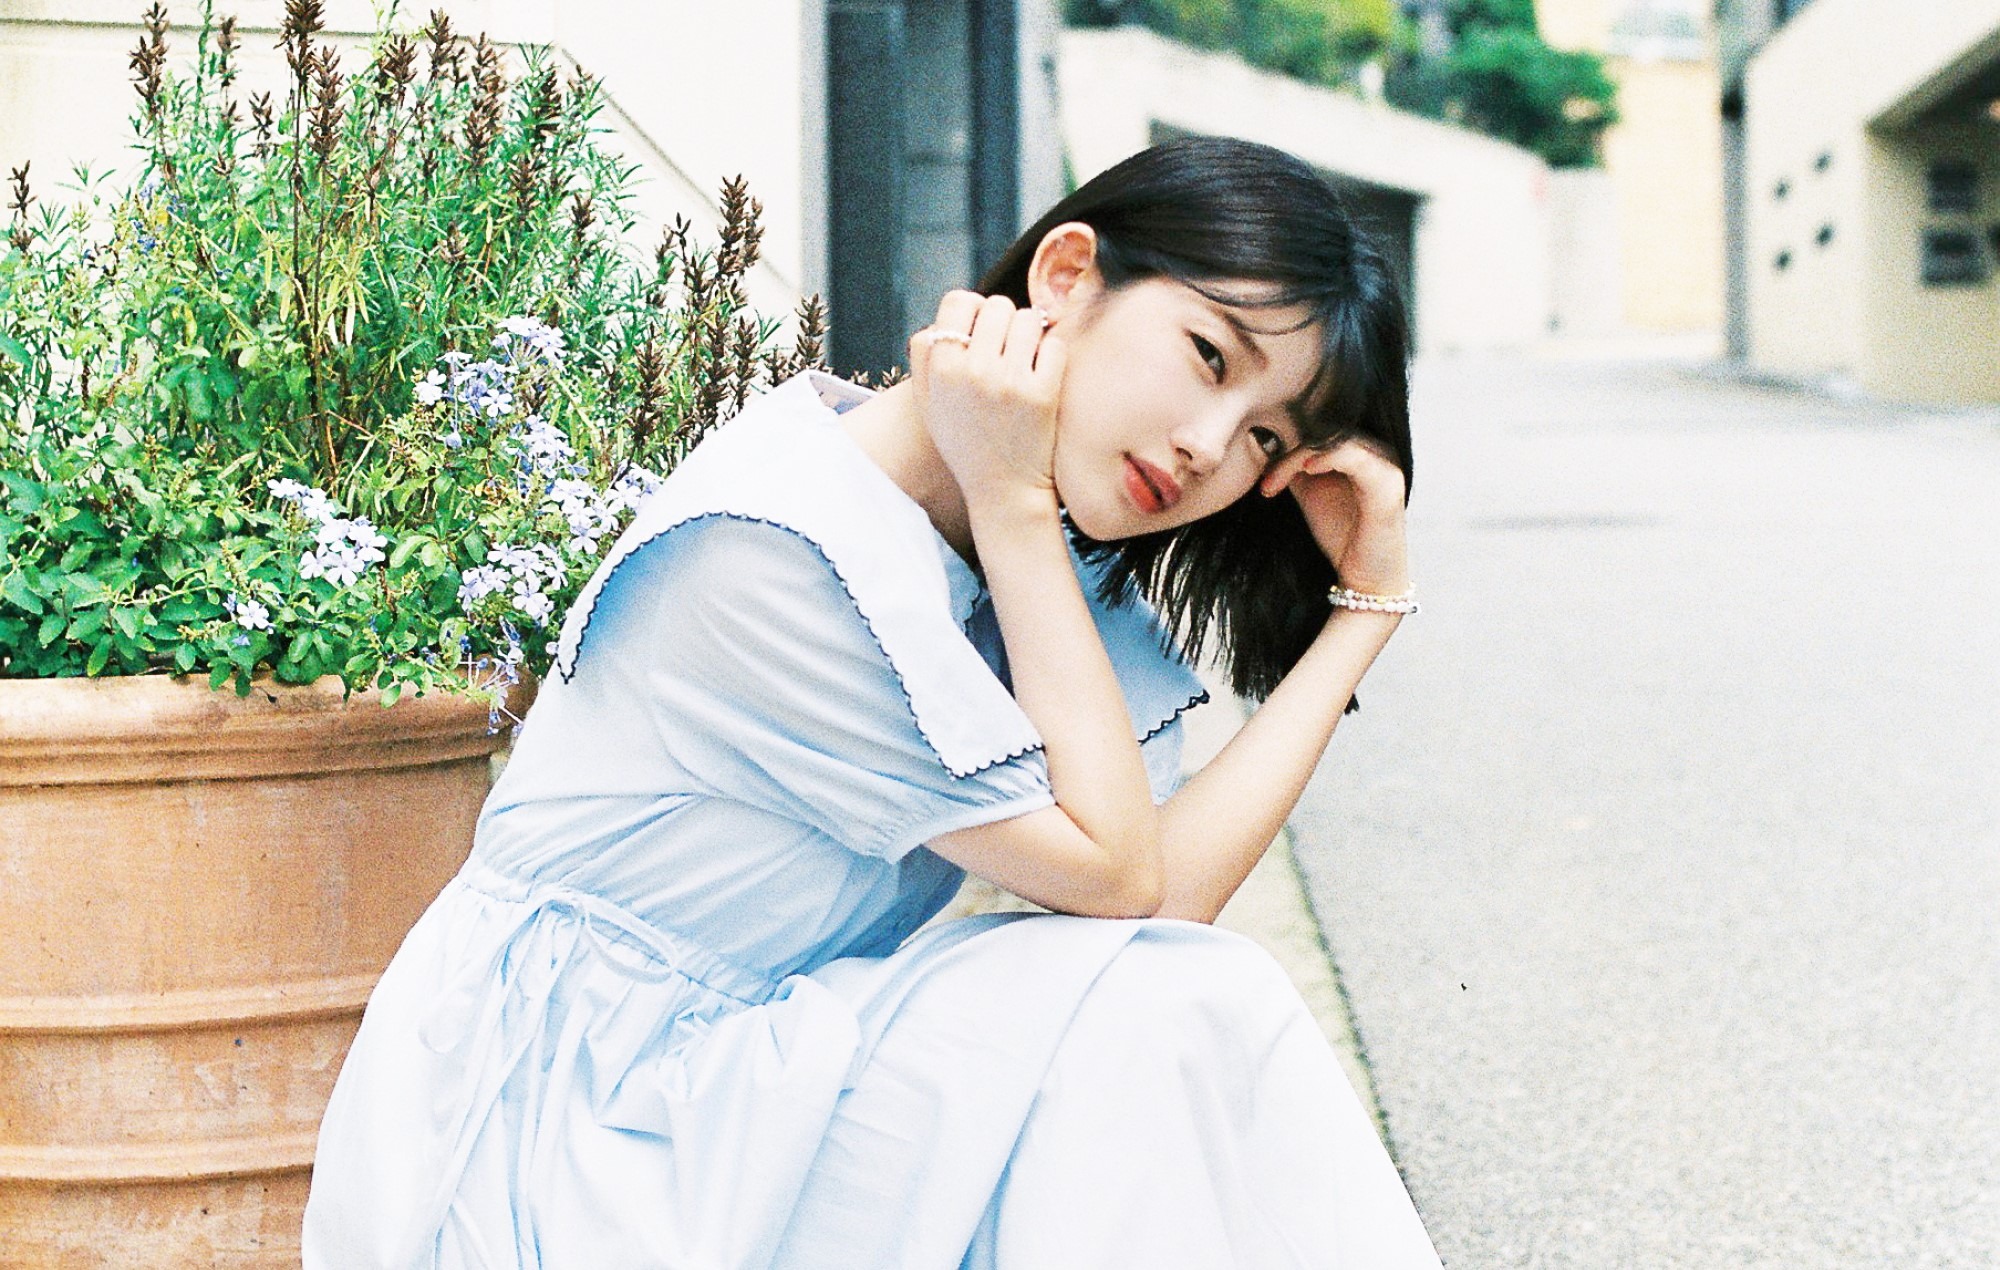 Yukika on the revival of city pop: “People that are into that niche genre will follow”